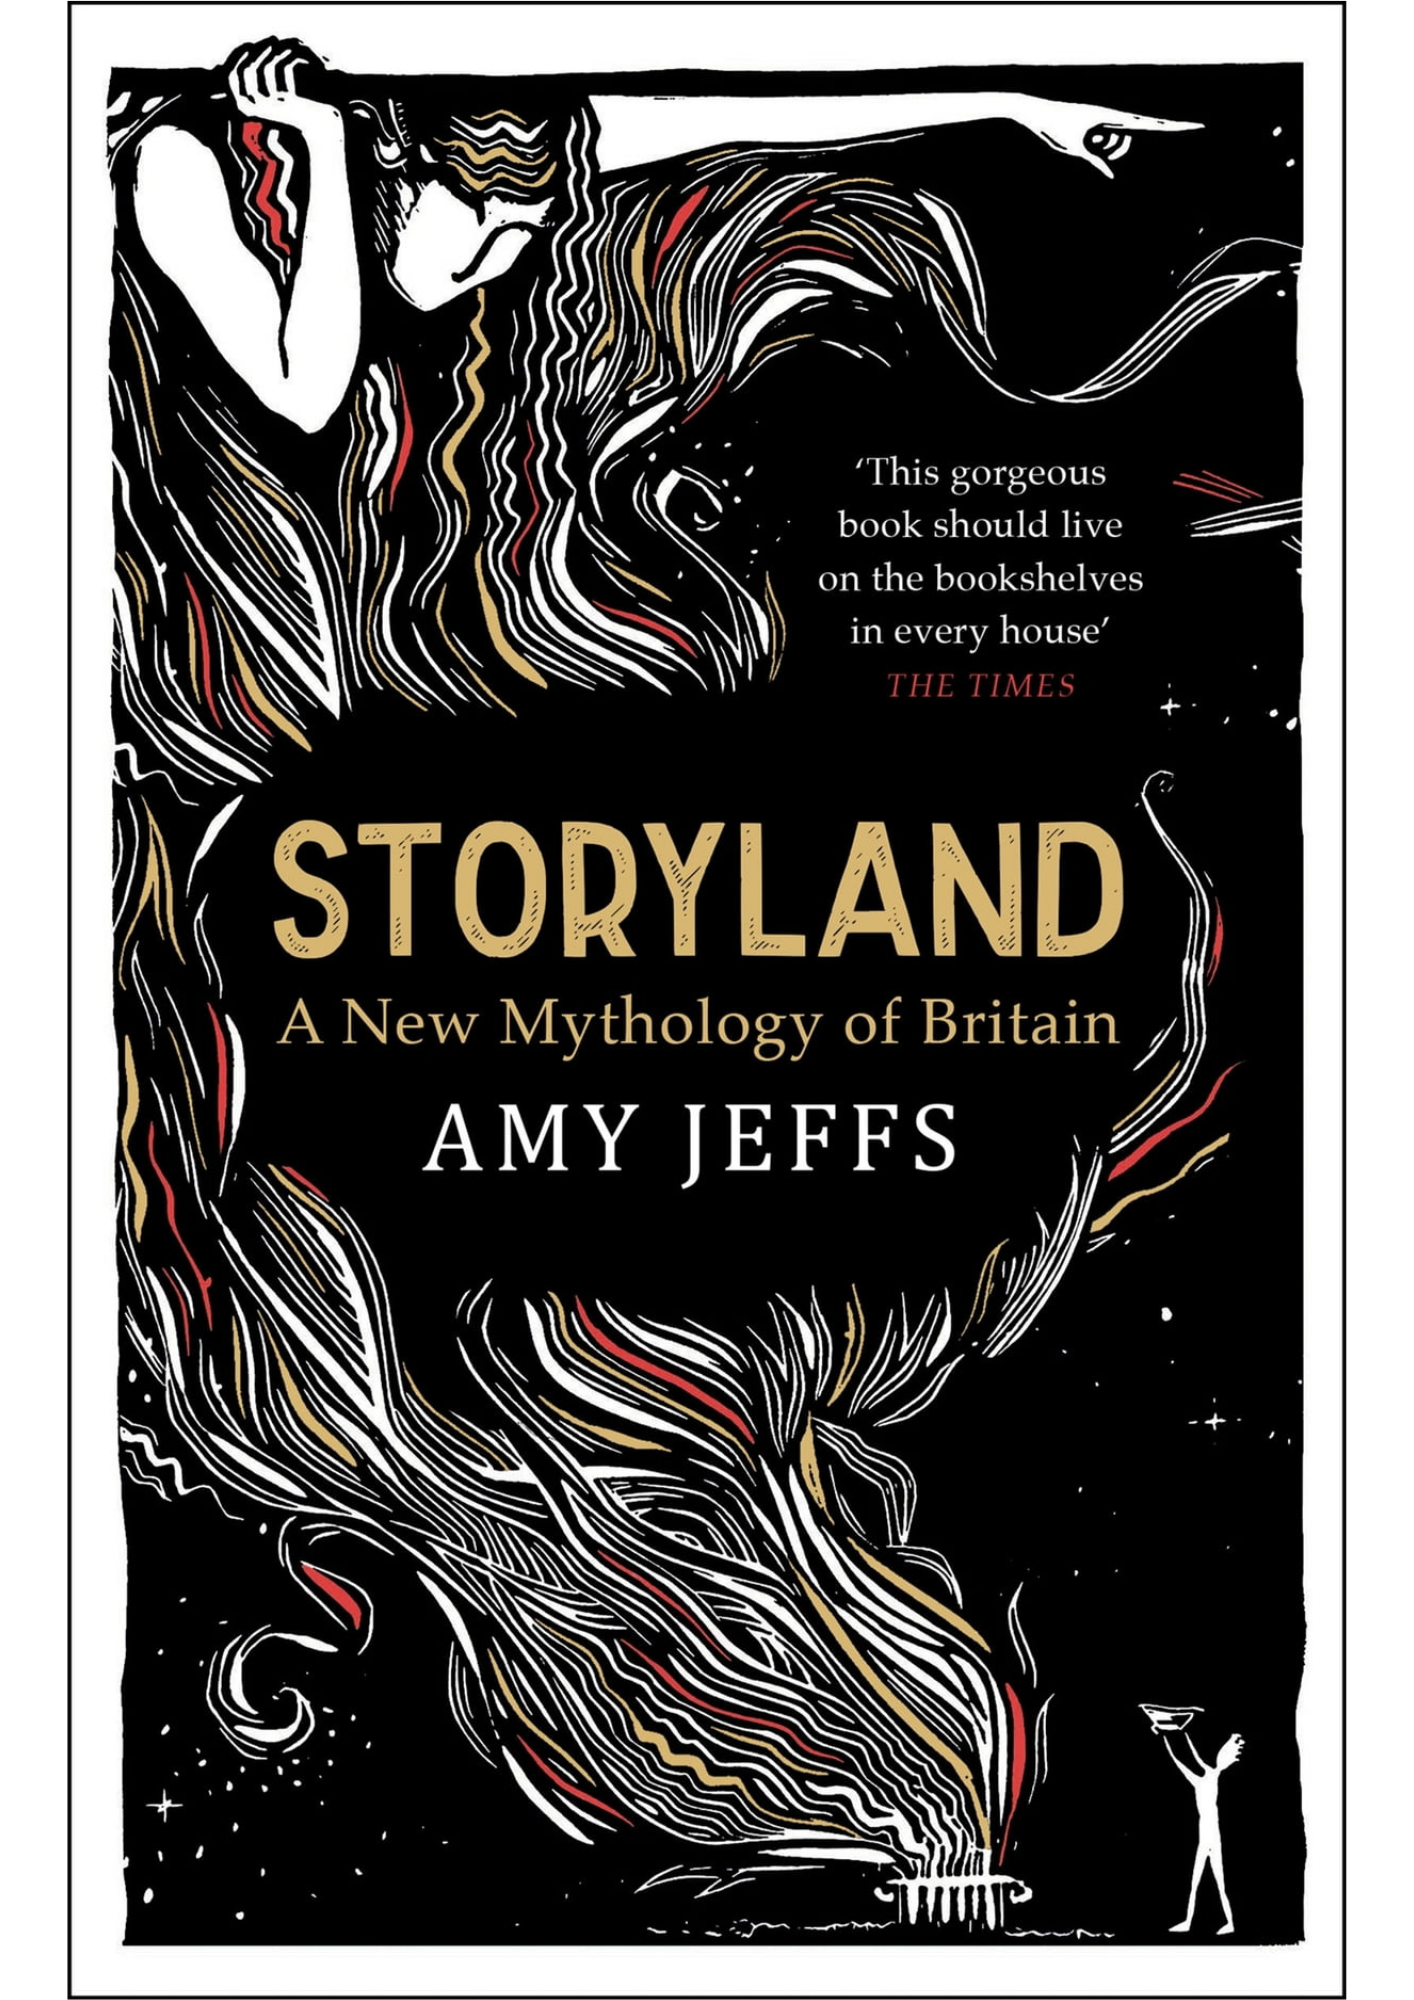 Frome Lit Fest: Storyland: Amy Jeffs in Conversation with Max Porter